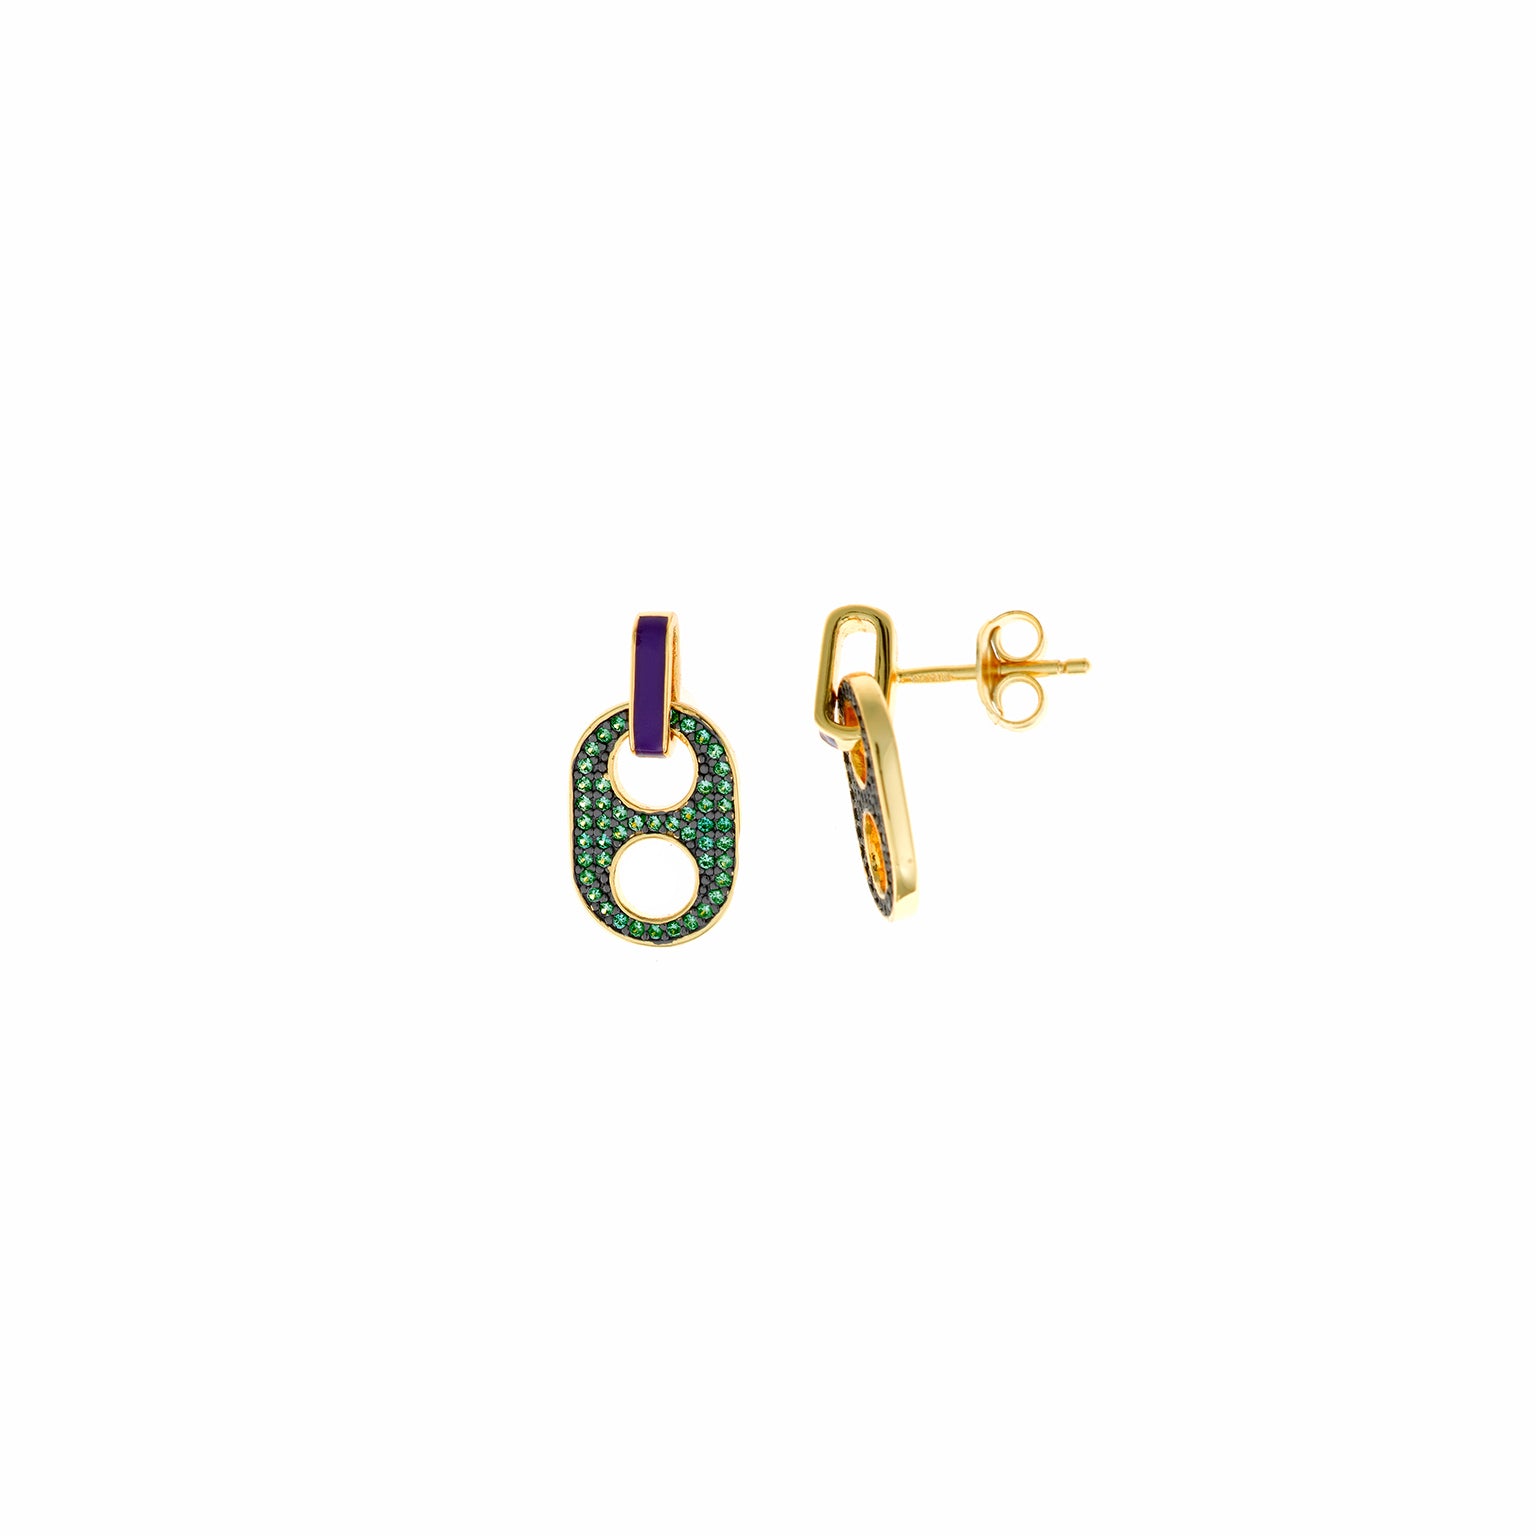 SALVATORE PLATA EARRING 925 PLATED GOLD LINK COFFEE 2